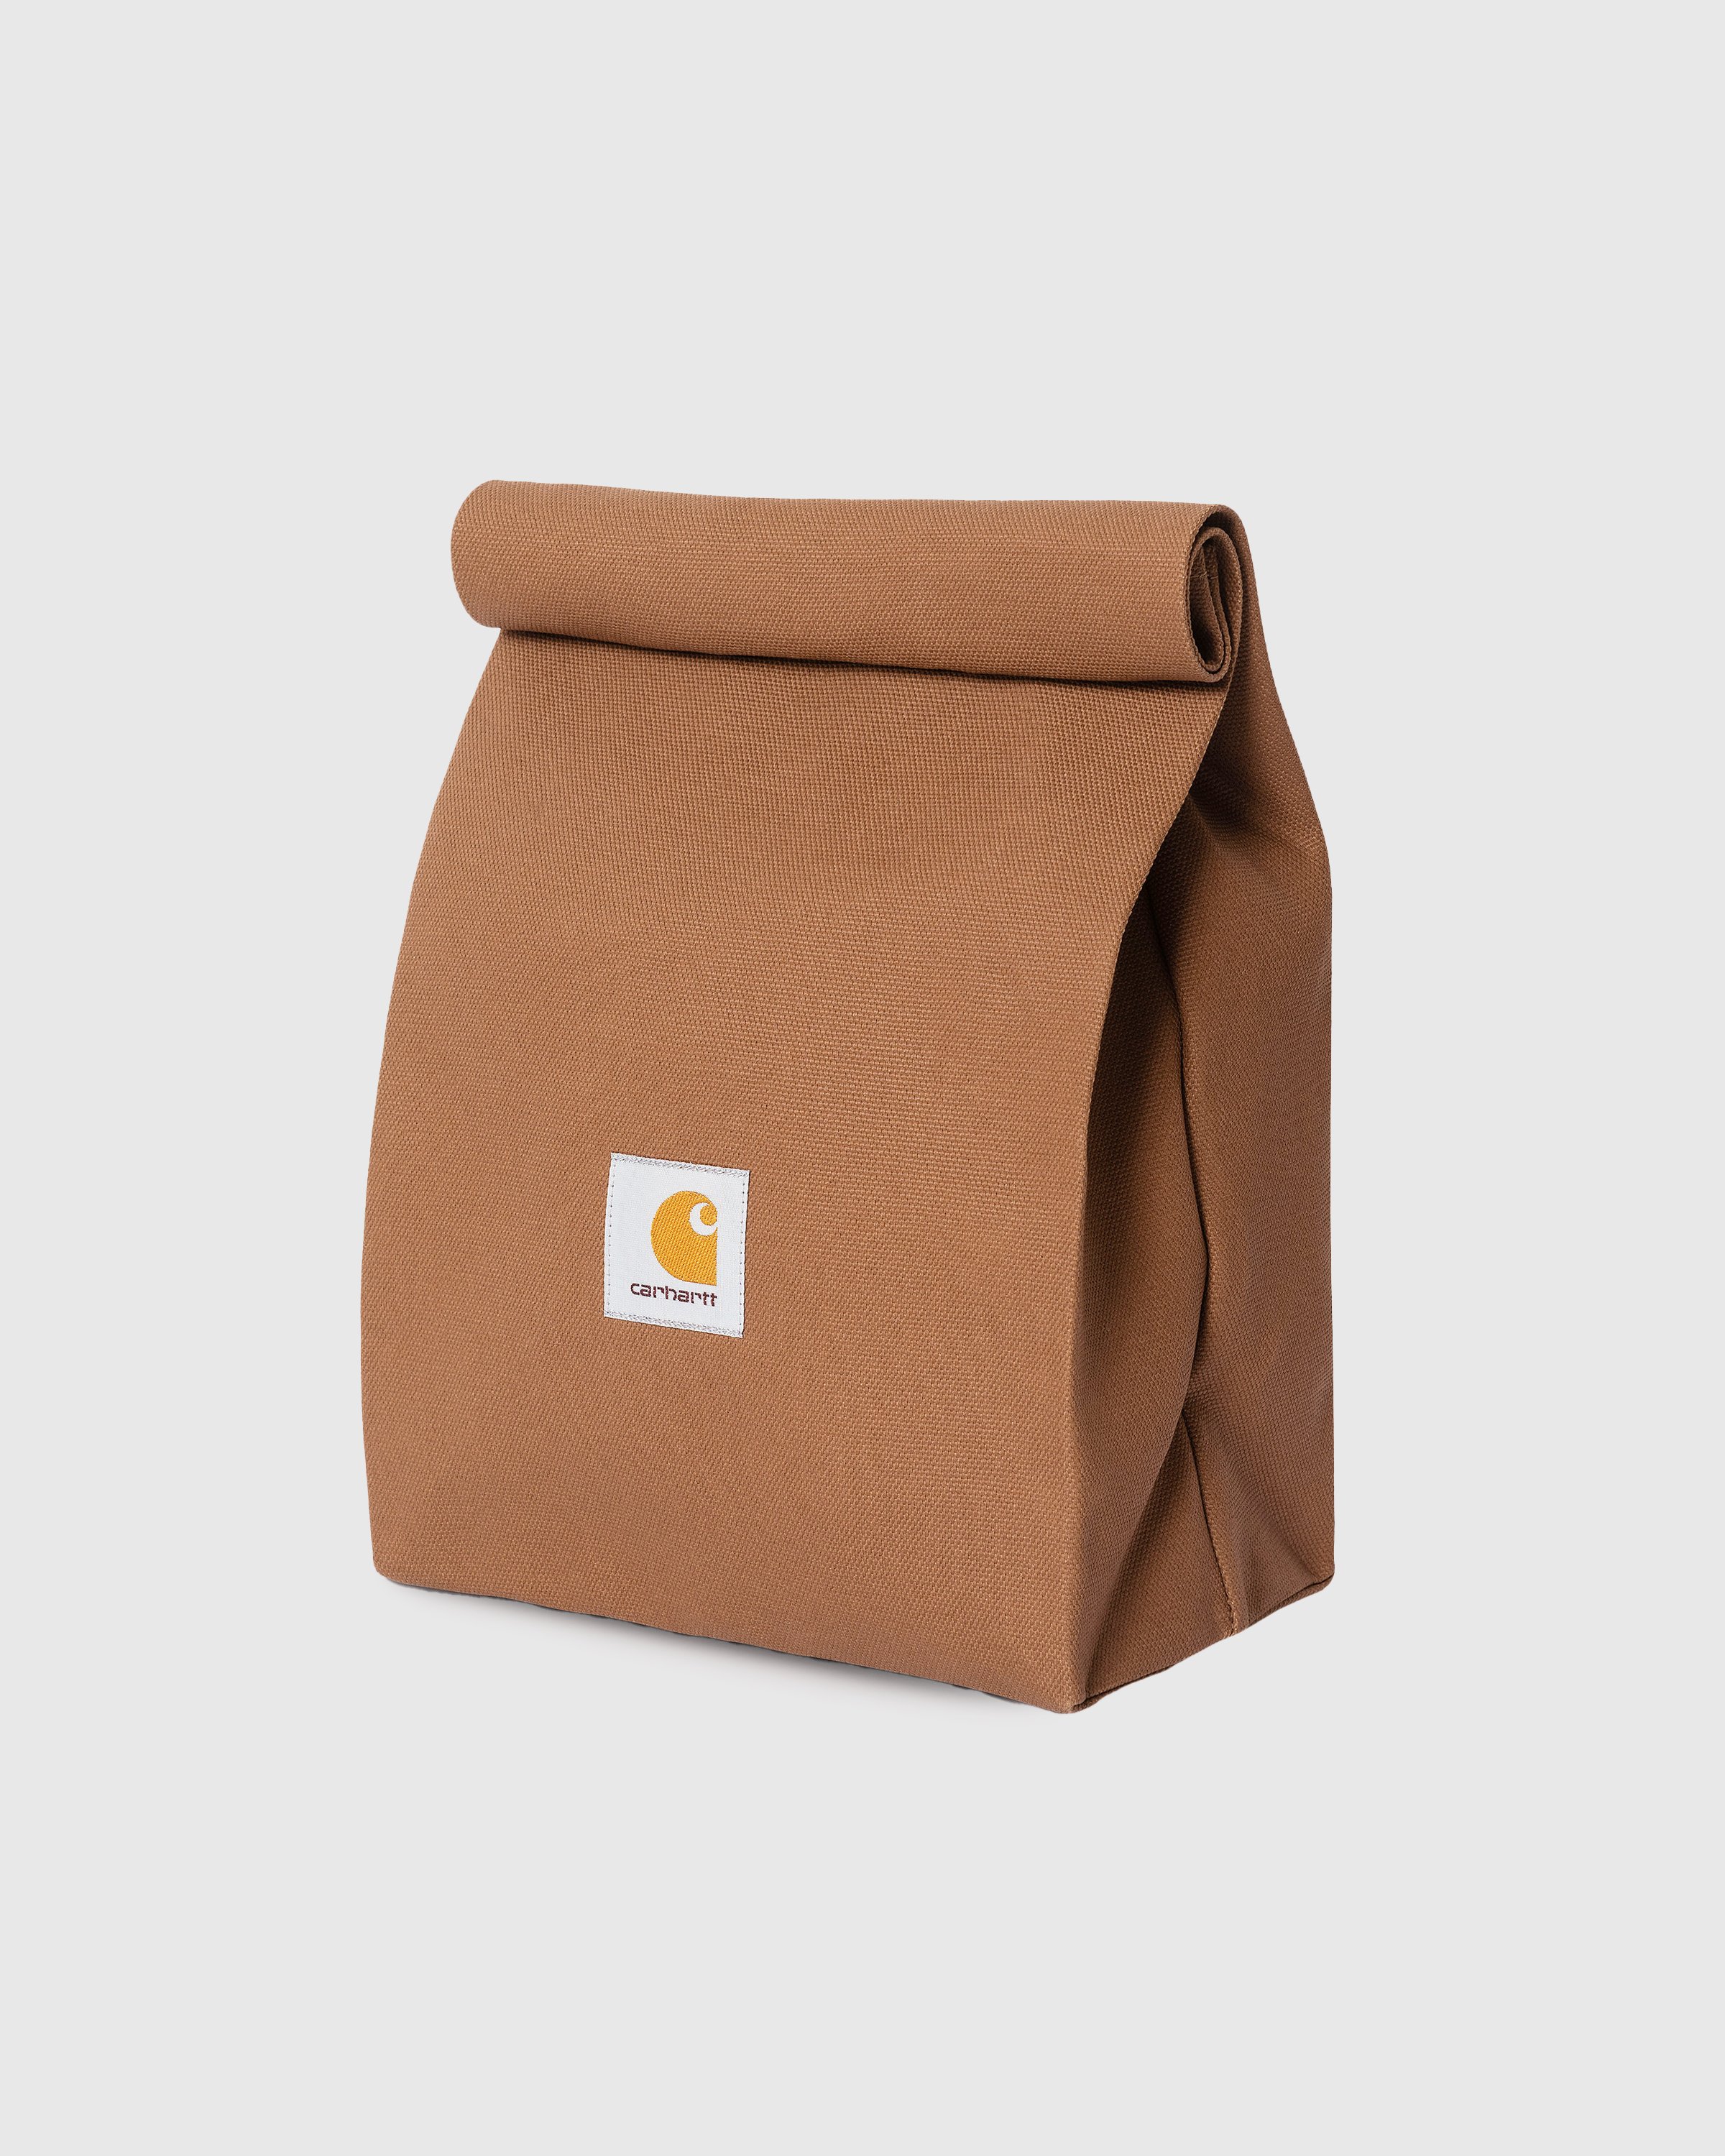 Carhartt WIP - Lunch Bag Hamilton Brown - Lifestyle - Brown - Image 1